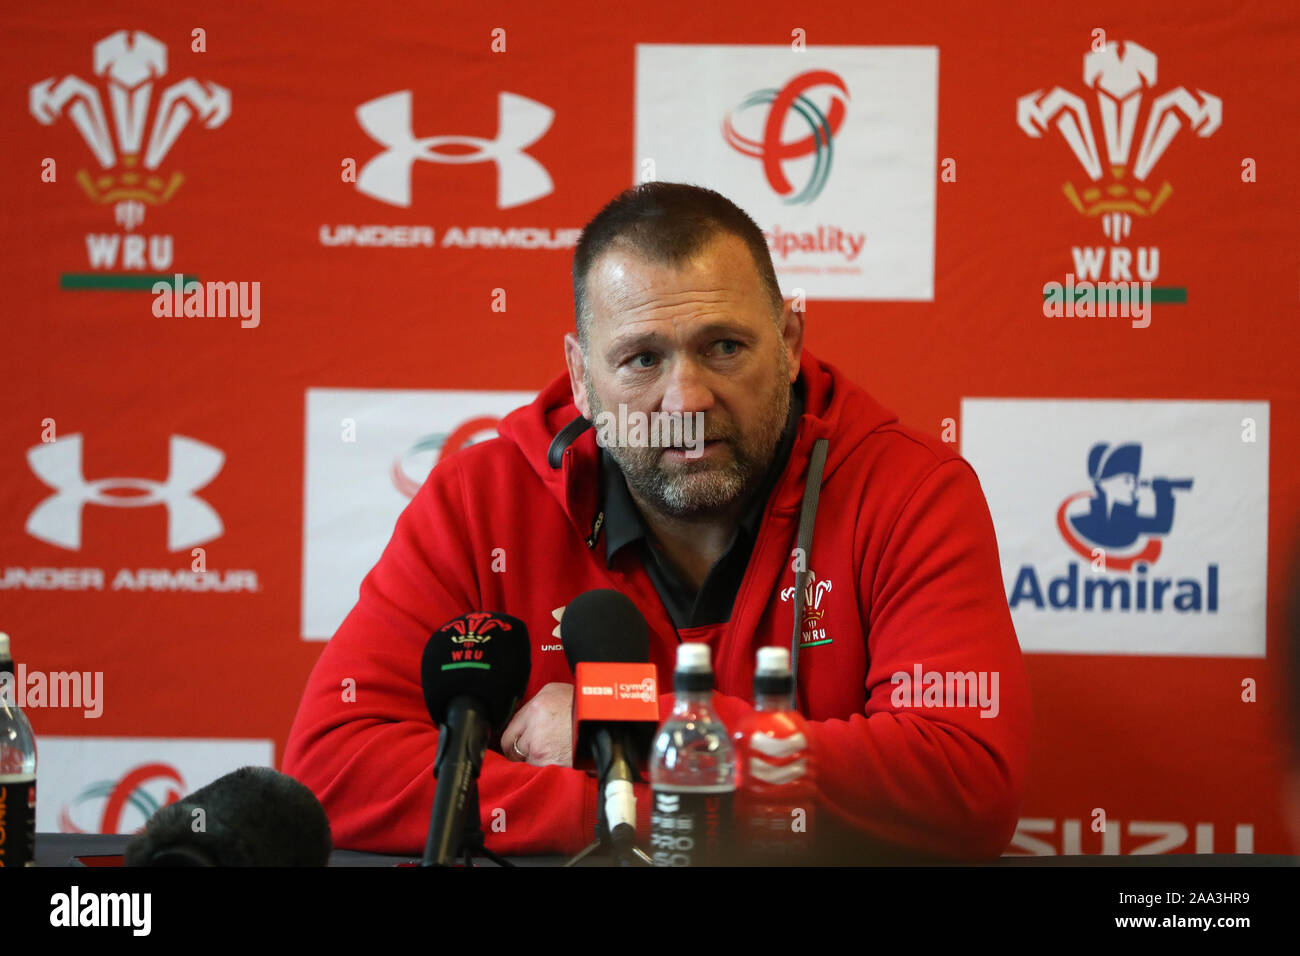 Cardiff, UK. 19th Nov, 2019. Jonathan Humphreys, the new assistant coach of Wales rugby teams speaks to the media. Wales rugby squad announcement press conference at the Vale Resort, Hensol, near Cardiff, South Wales on Tuesday 19th November 2019. The team are preparing for their match against the Barbarians at the end of November. pic by Andrew Orchard/Alamy Live News Stock Photo